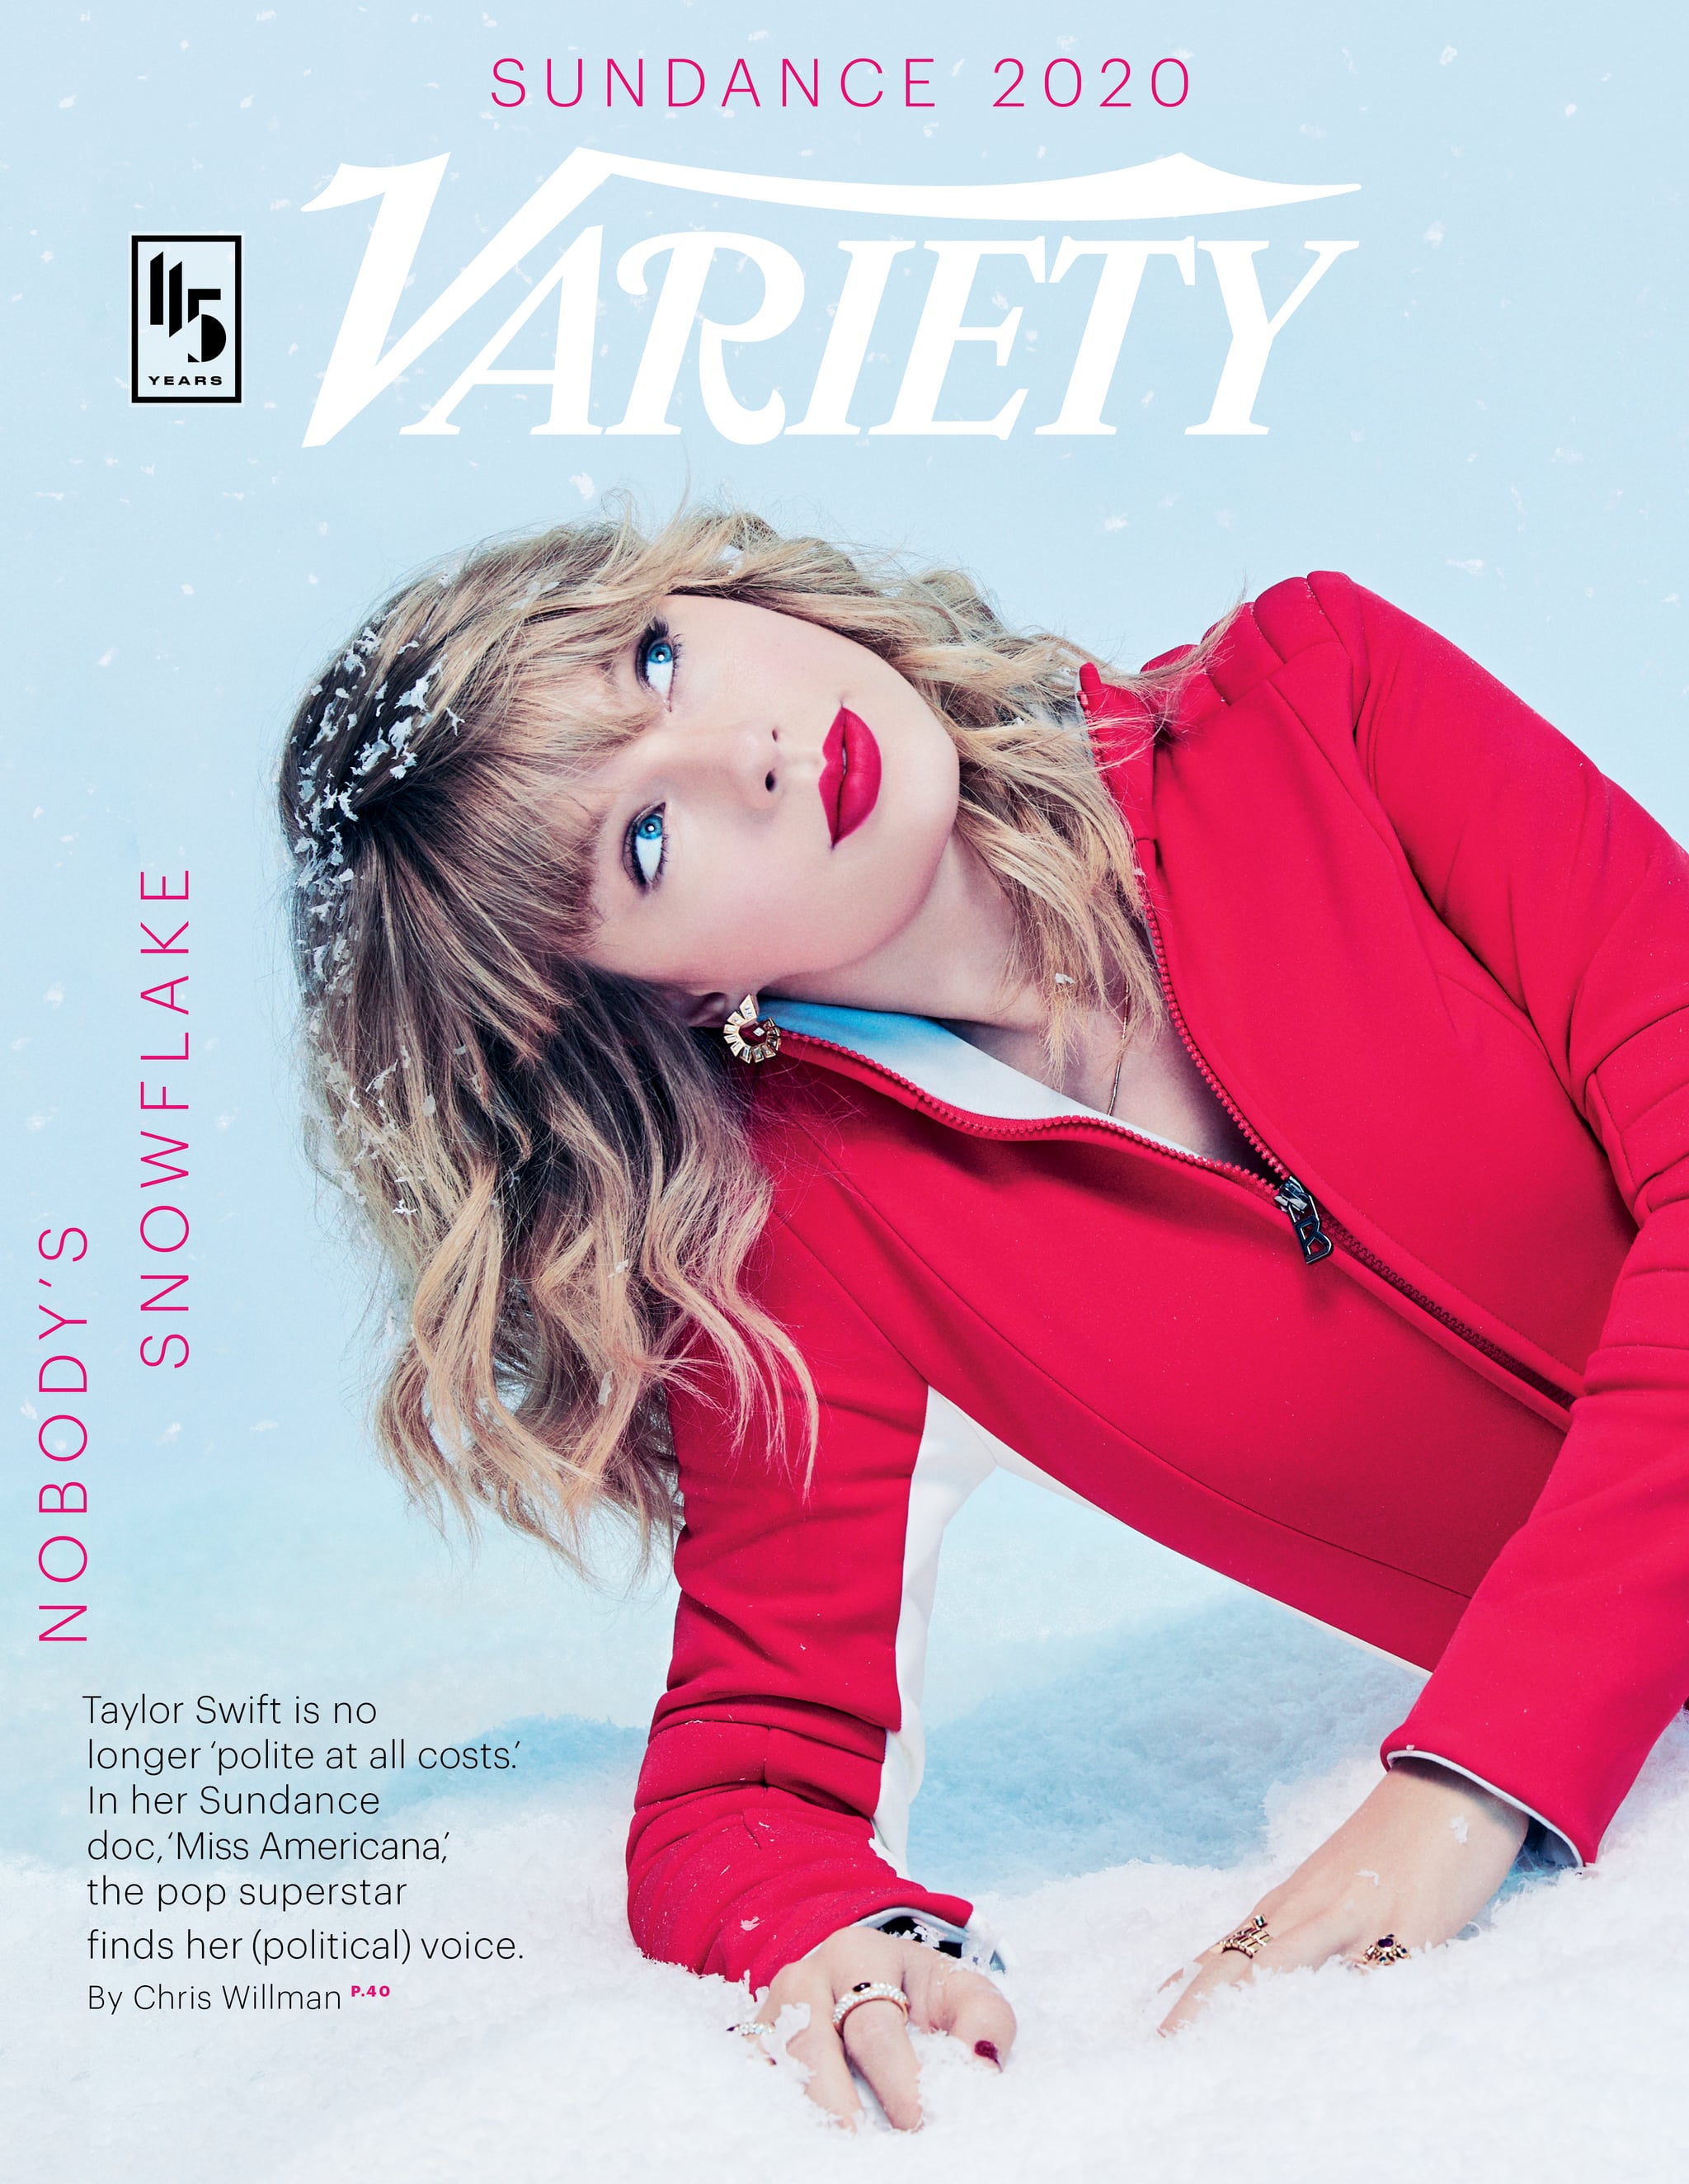 Read Taylor Swifts Quotes From Her Interview With Variety